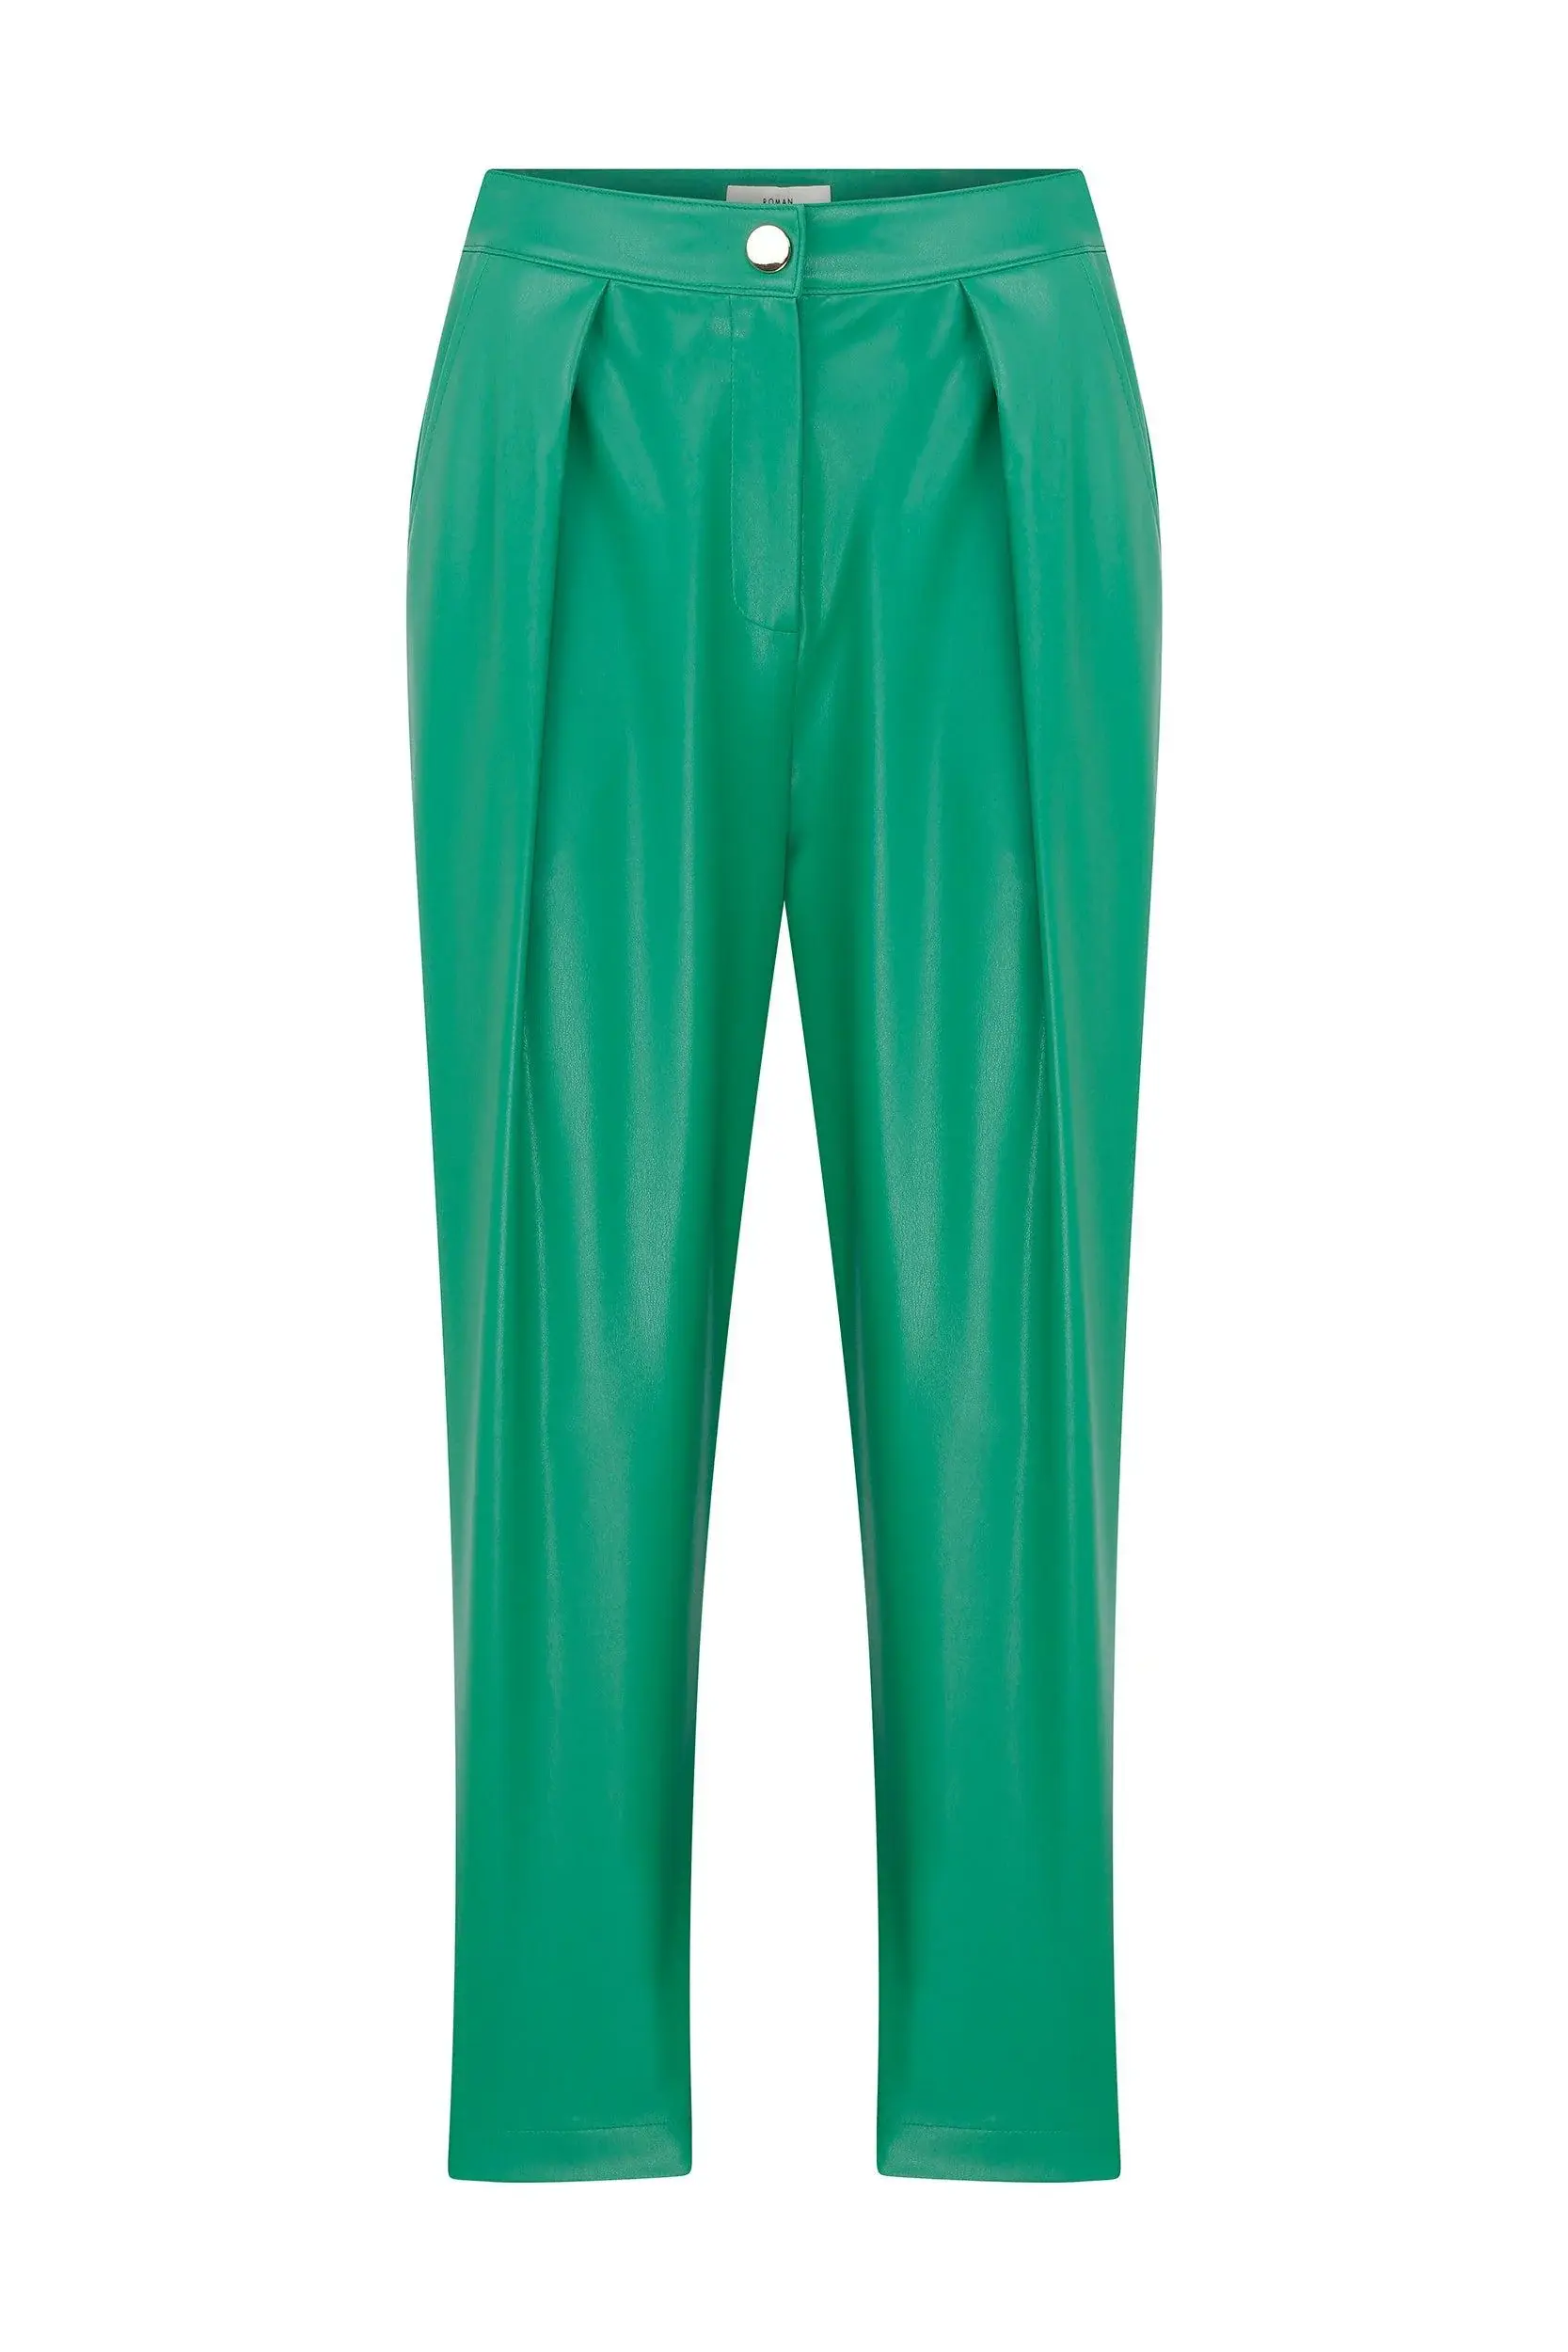 Roman Cropped Pleather Green Trousers - 2 / Green. 1